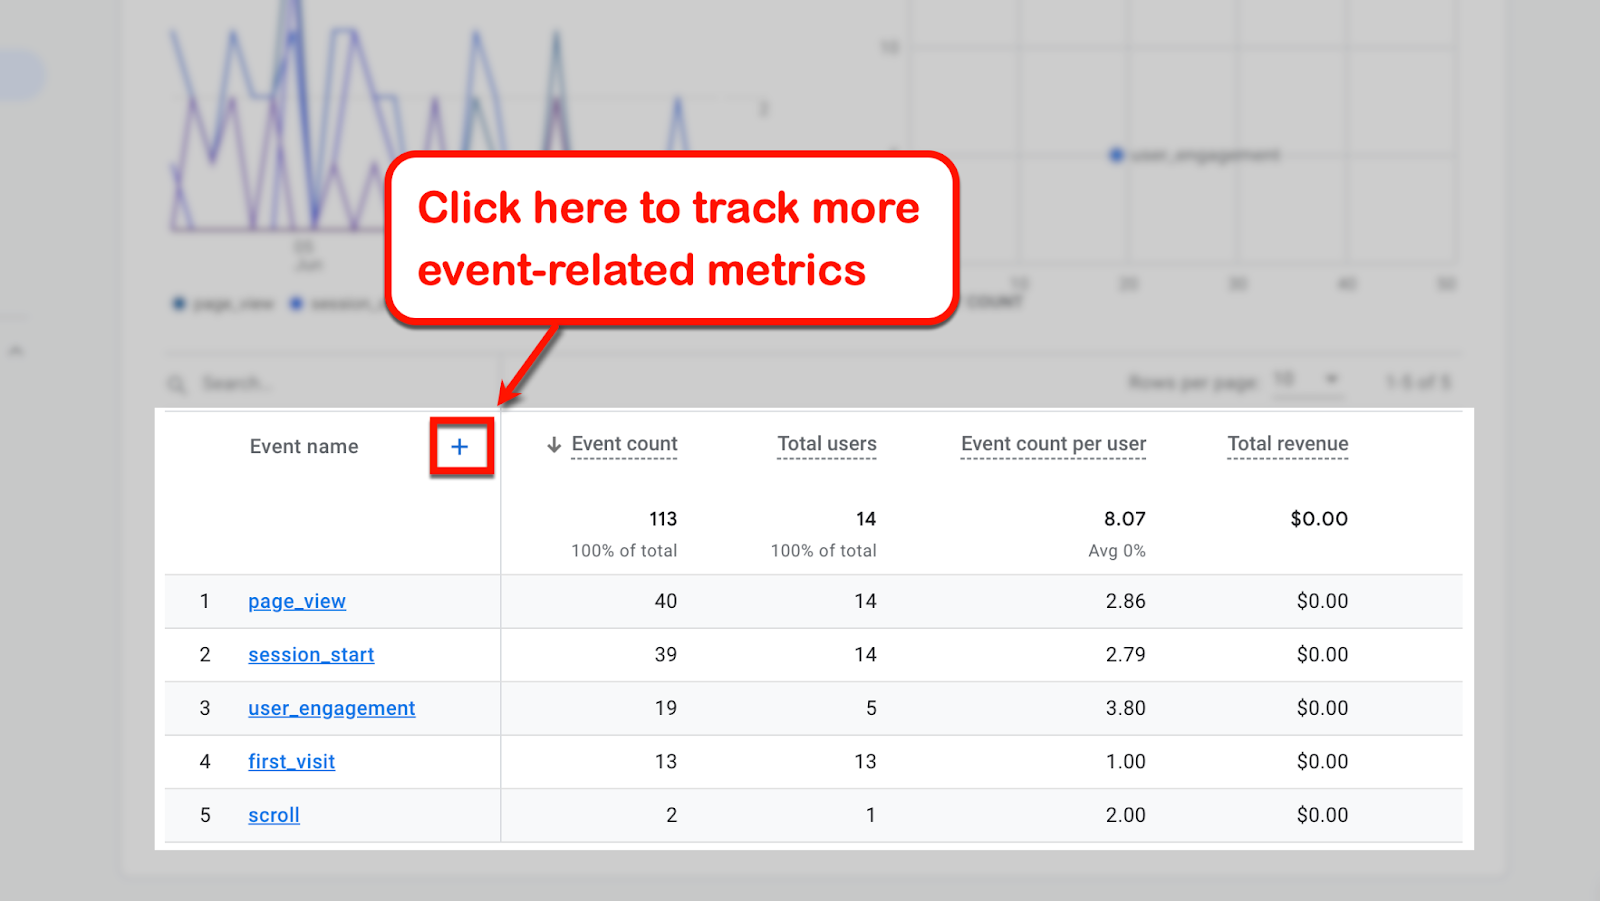 Click the "plus" button to track more event-related metrics